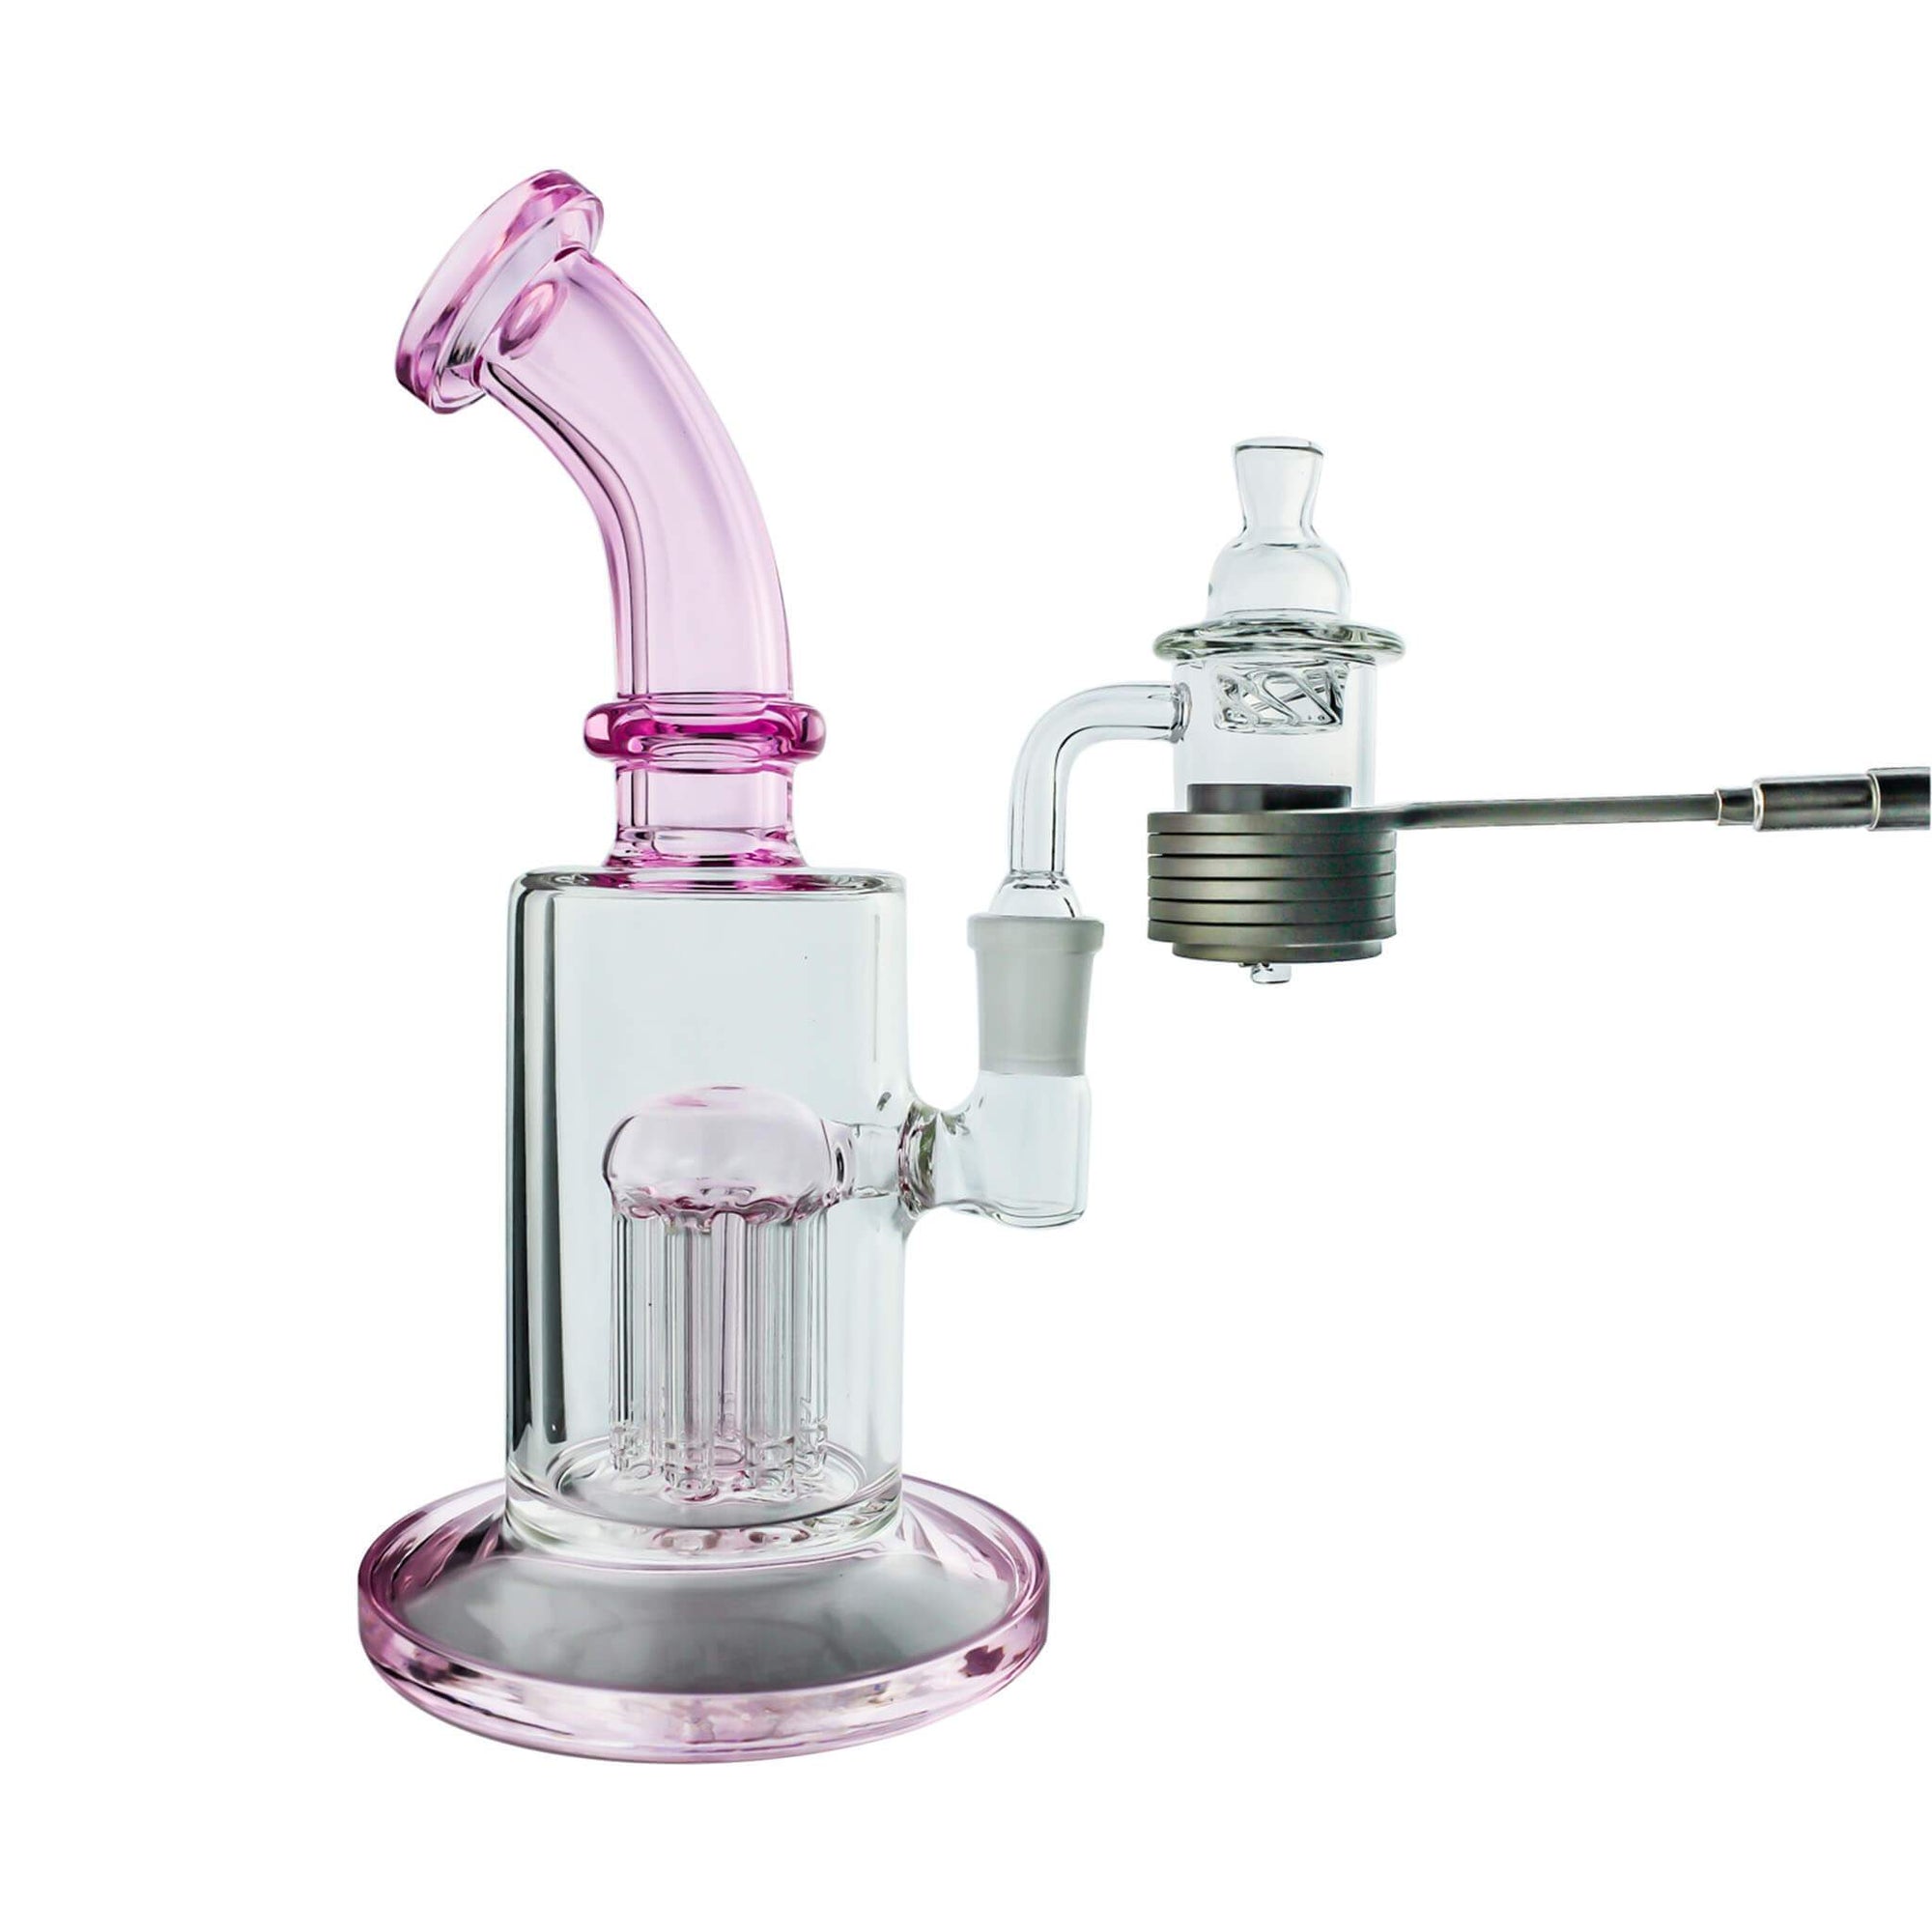 Spin Matrix 30mm Enail Complete Dabbing Enail Kit #1 | Complete Kit In Use View | TDS